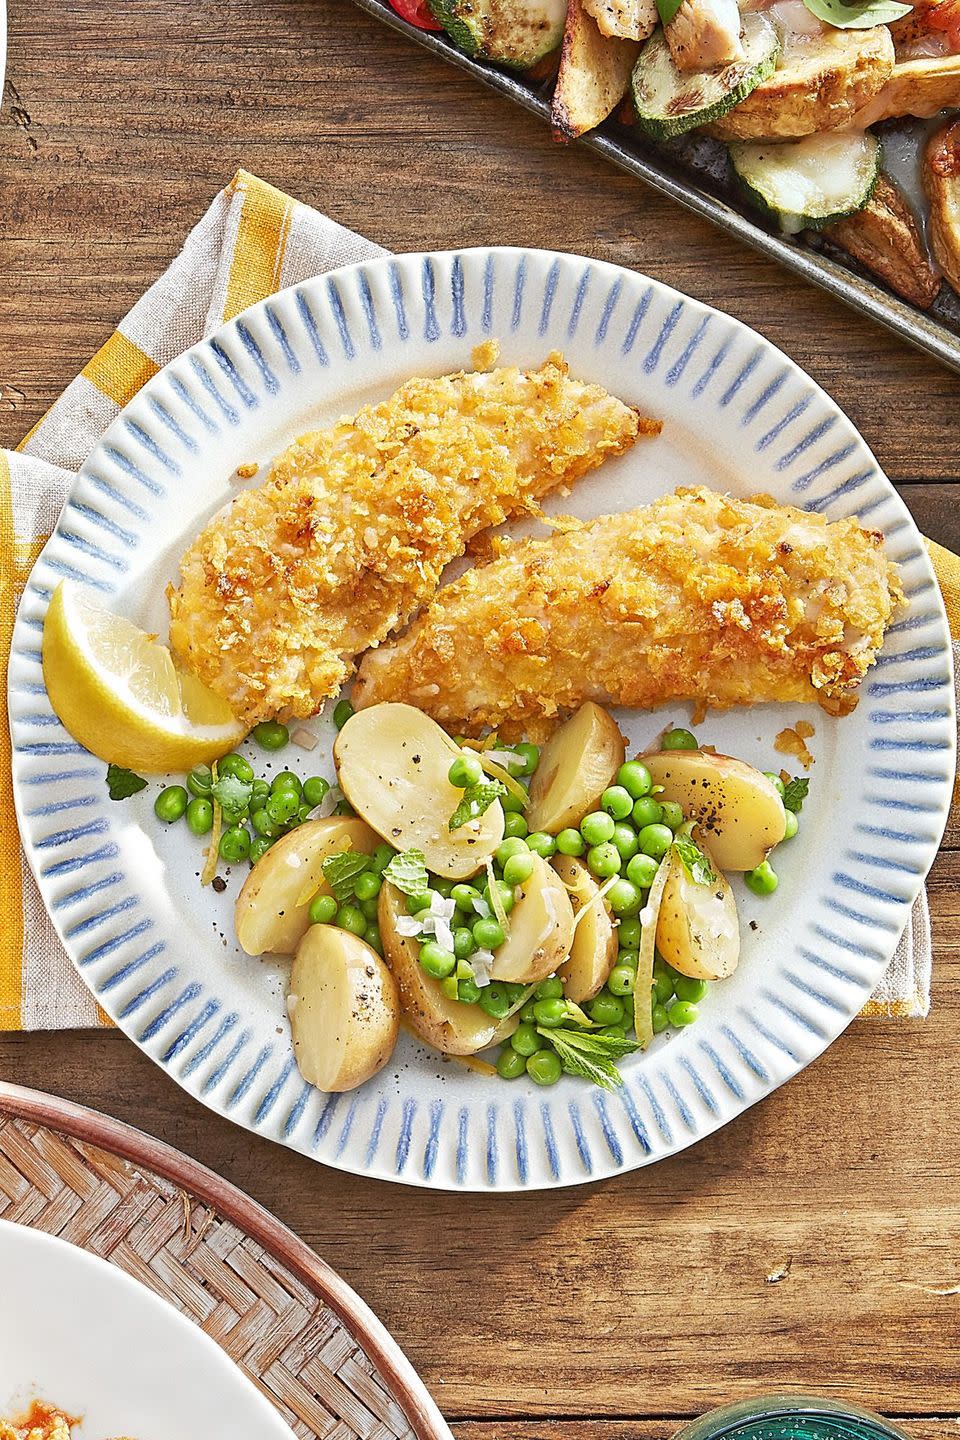 60) Cornflake Chicken Tenders with Potatoes and Peas